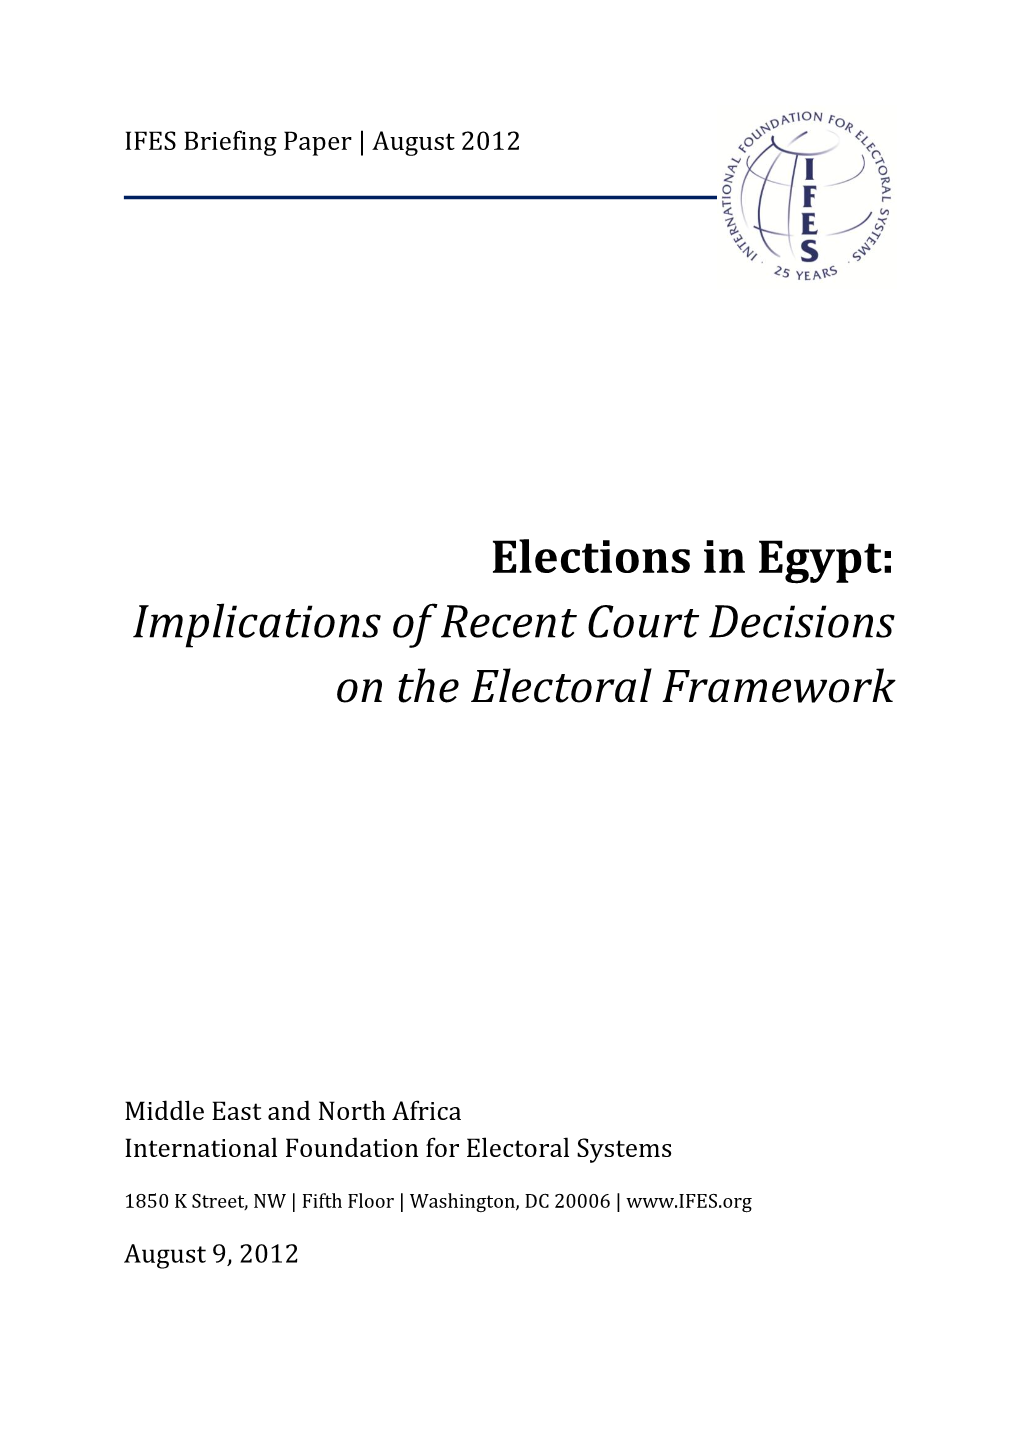 Elections in Egypt: Implications of Recent Court Decisions on the Electoral Framework